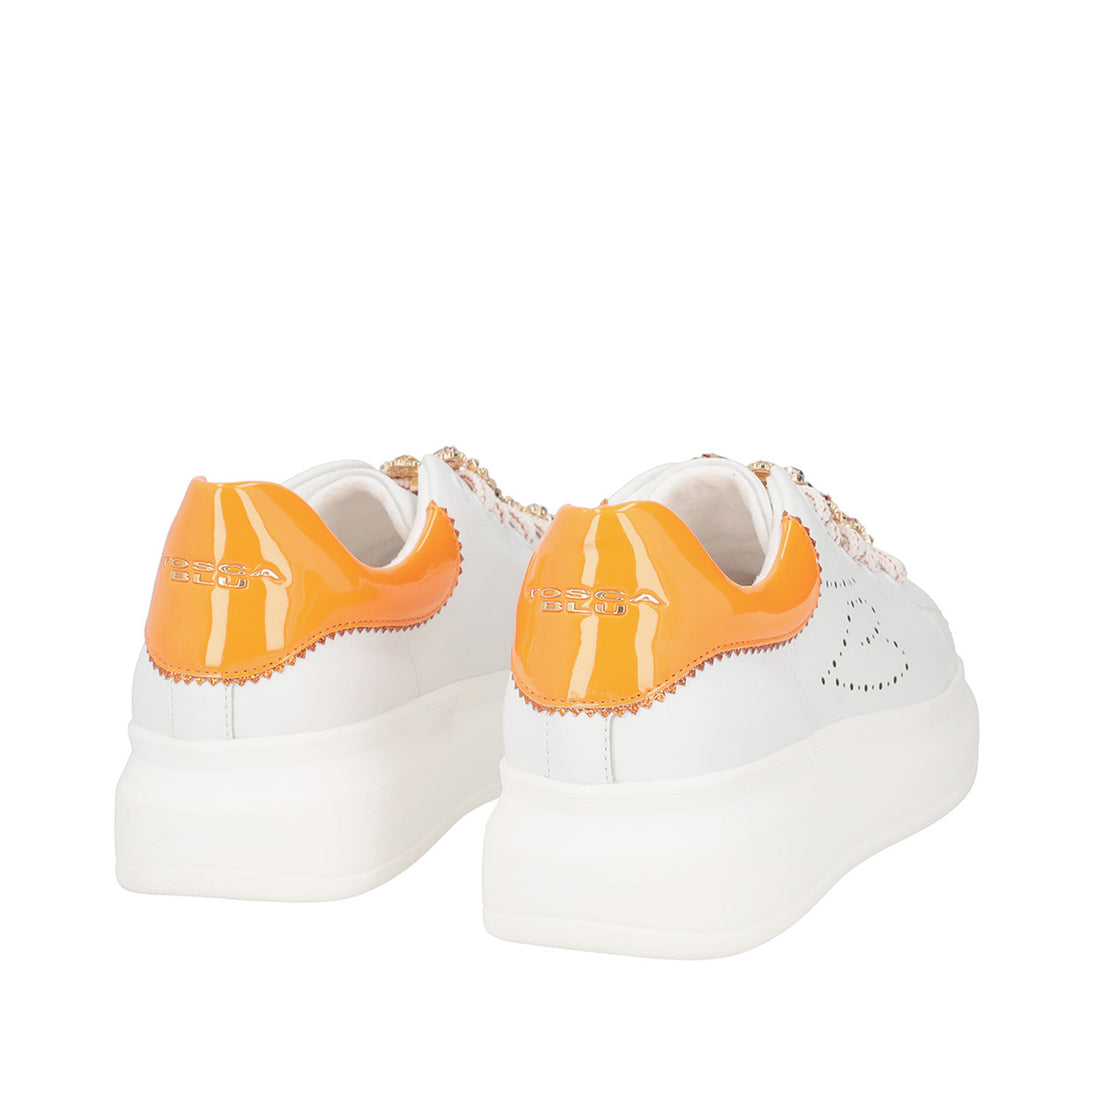 WHITE/ORANGE GLAMOUR SNEAKER WITH BUTTERFLY ACCESSORY